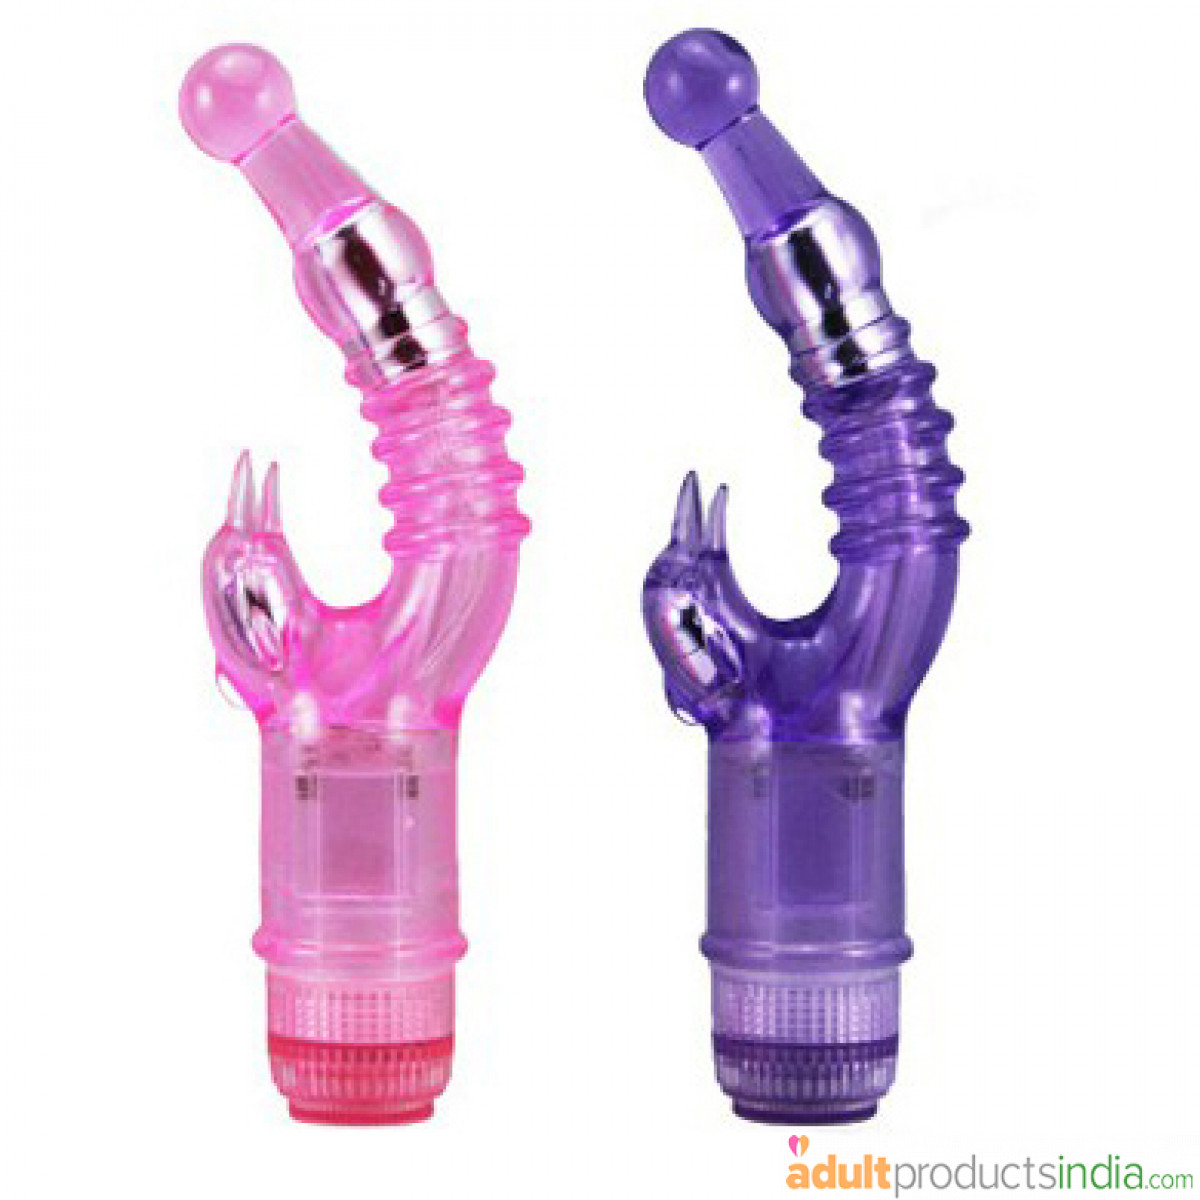 Dolphin playing with a pearl sex toys G spot clitoris double stimulate woman masturbation(Pink or Purple)